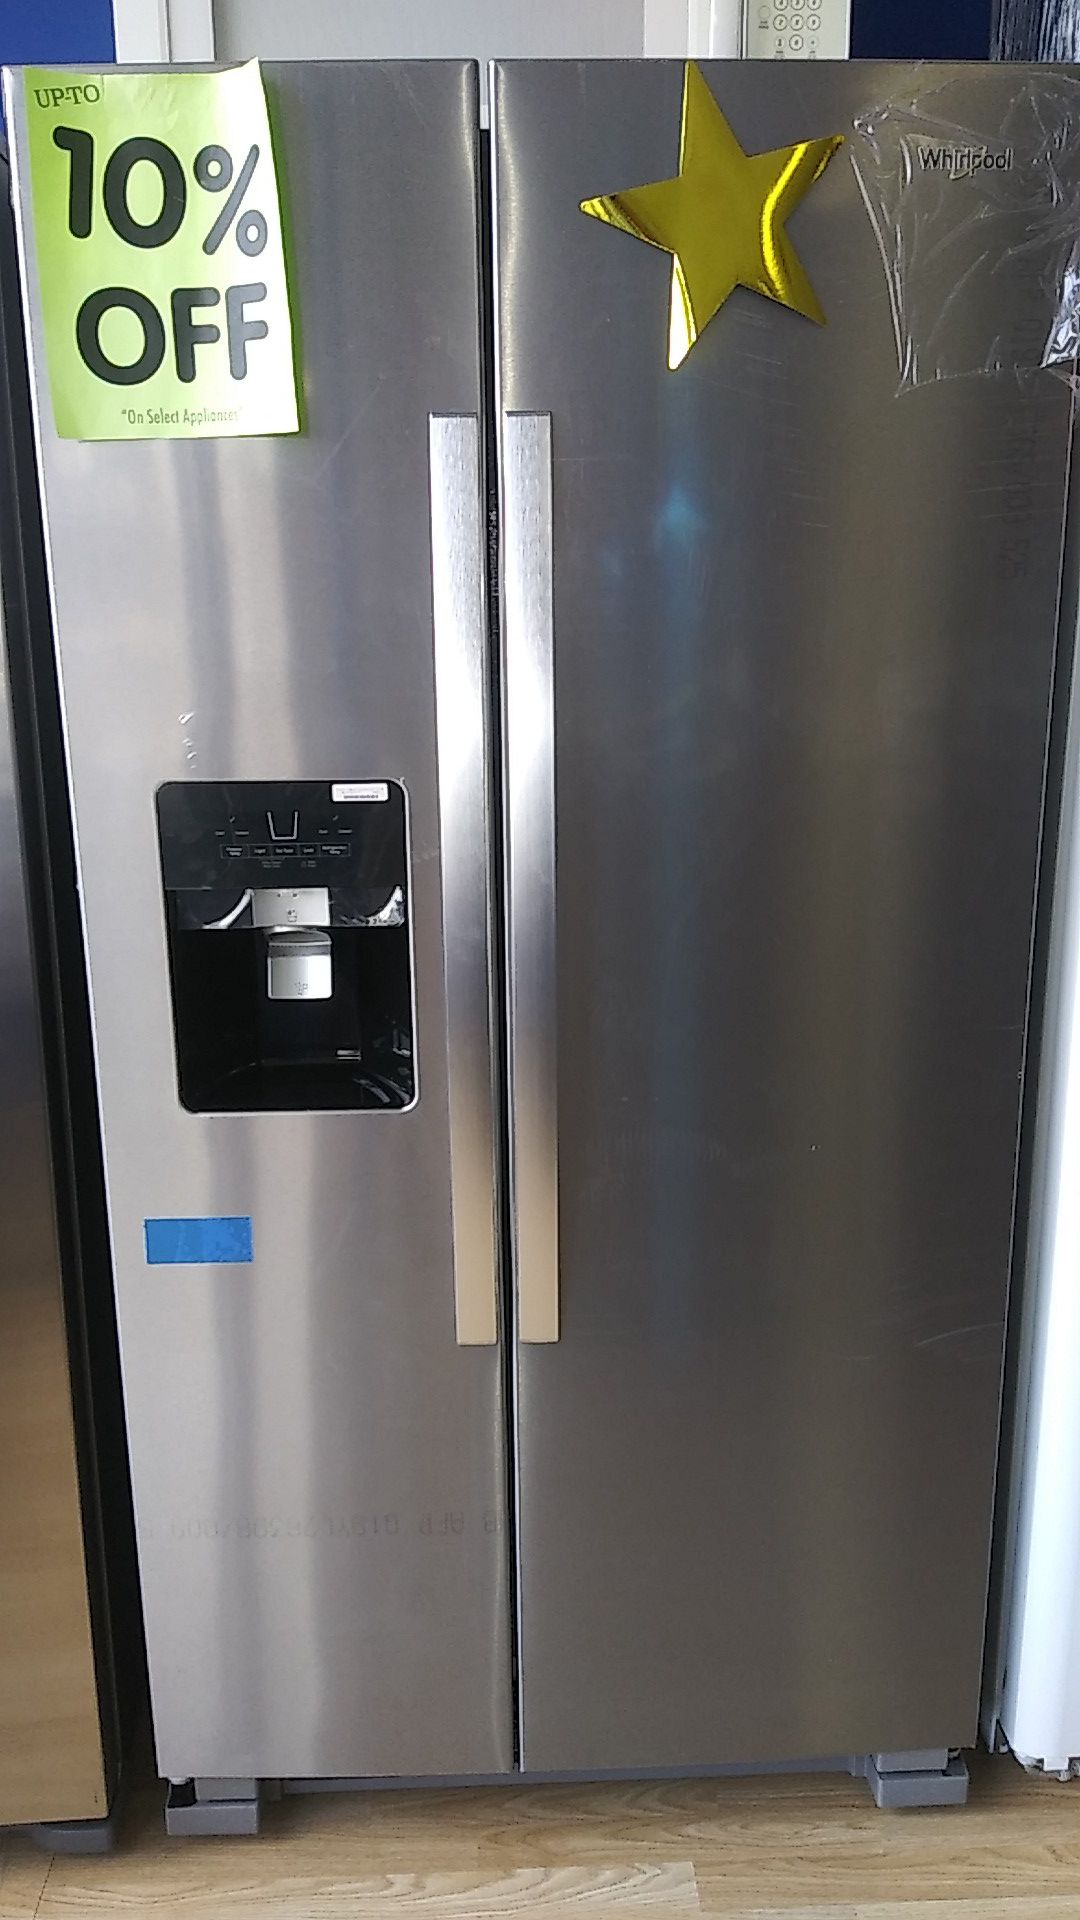 Whirlpool Side by Side Refrigerator ⭐⭐New year new appliance in payments with 39 down no credit needed delivery available🚚